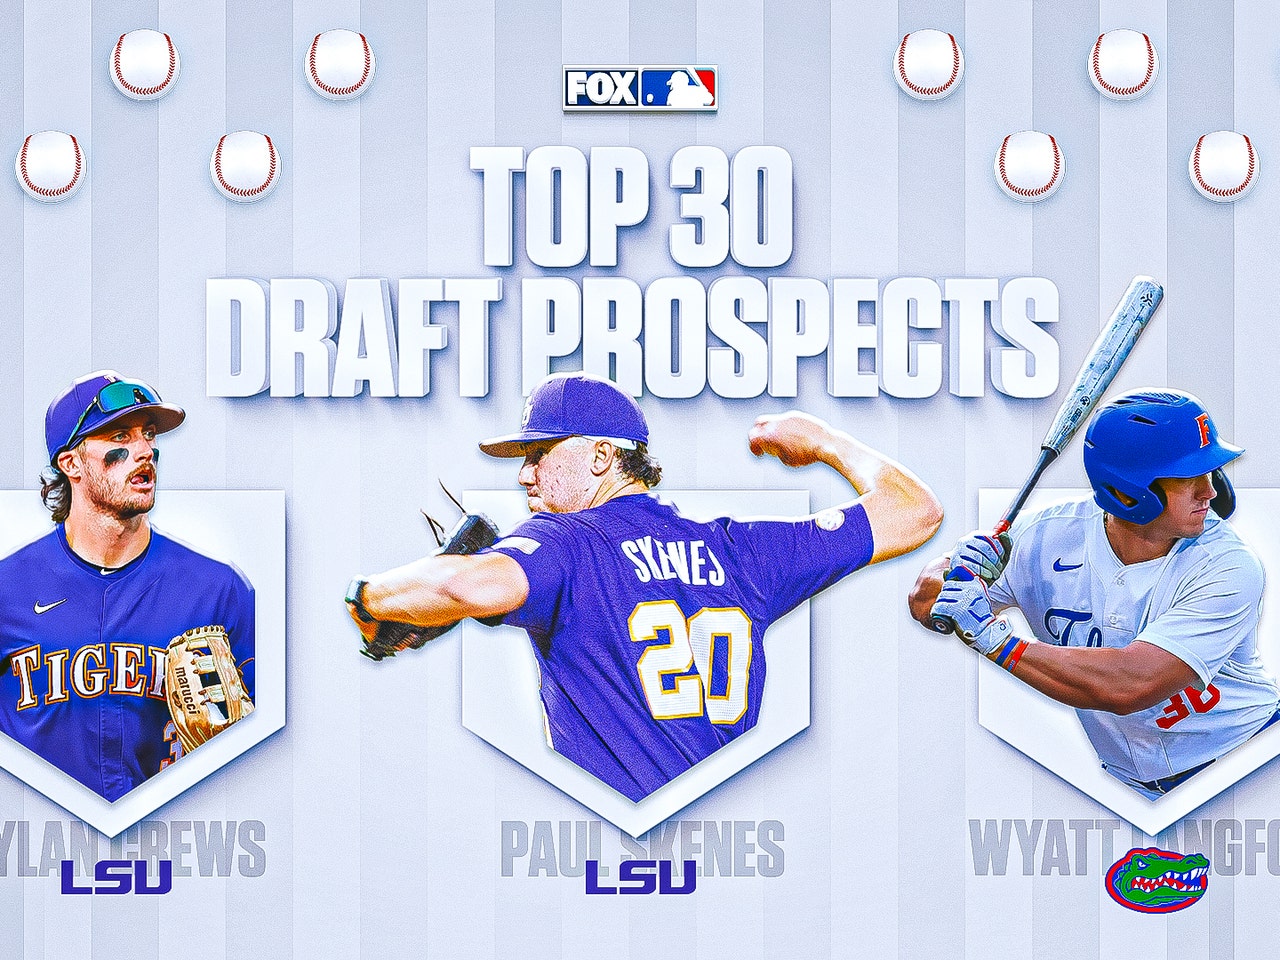 2023 MLB Draft prospect rankings Dylan Crews leads strong top 30 FOX Sports